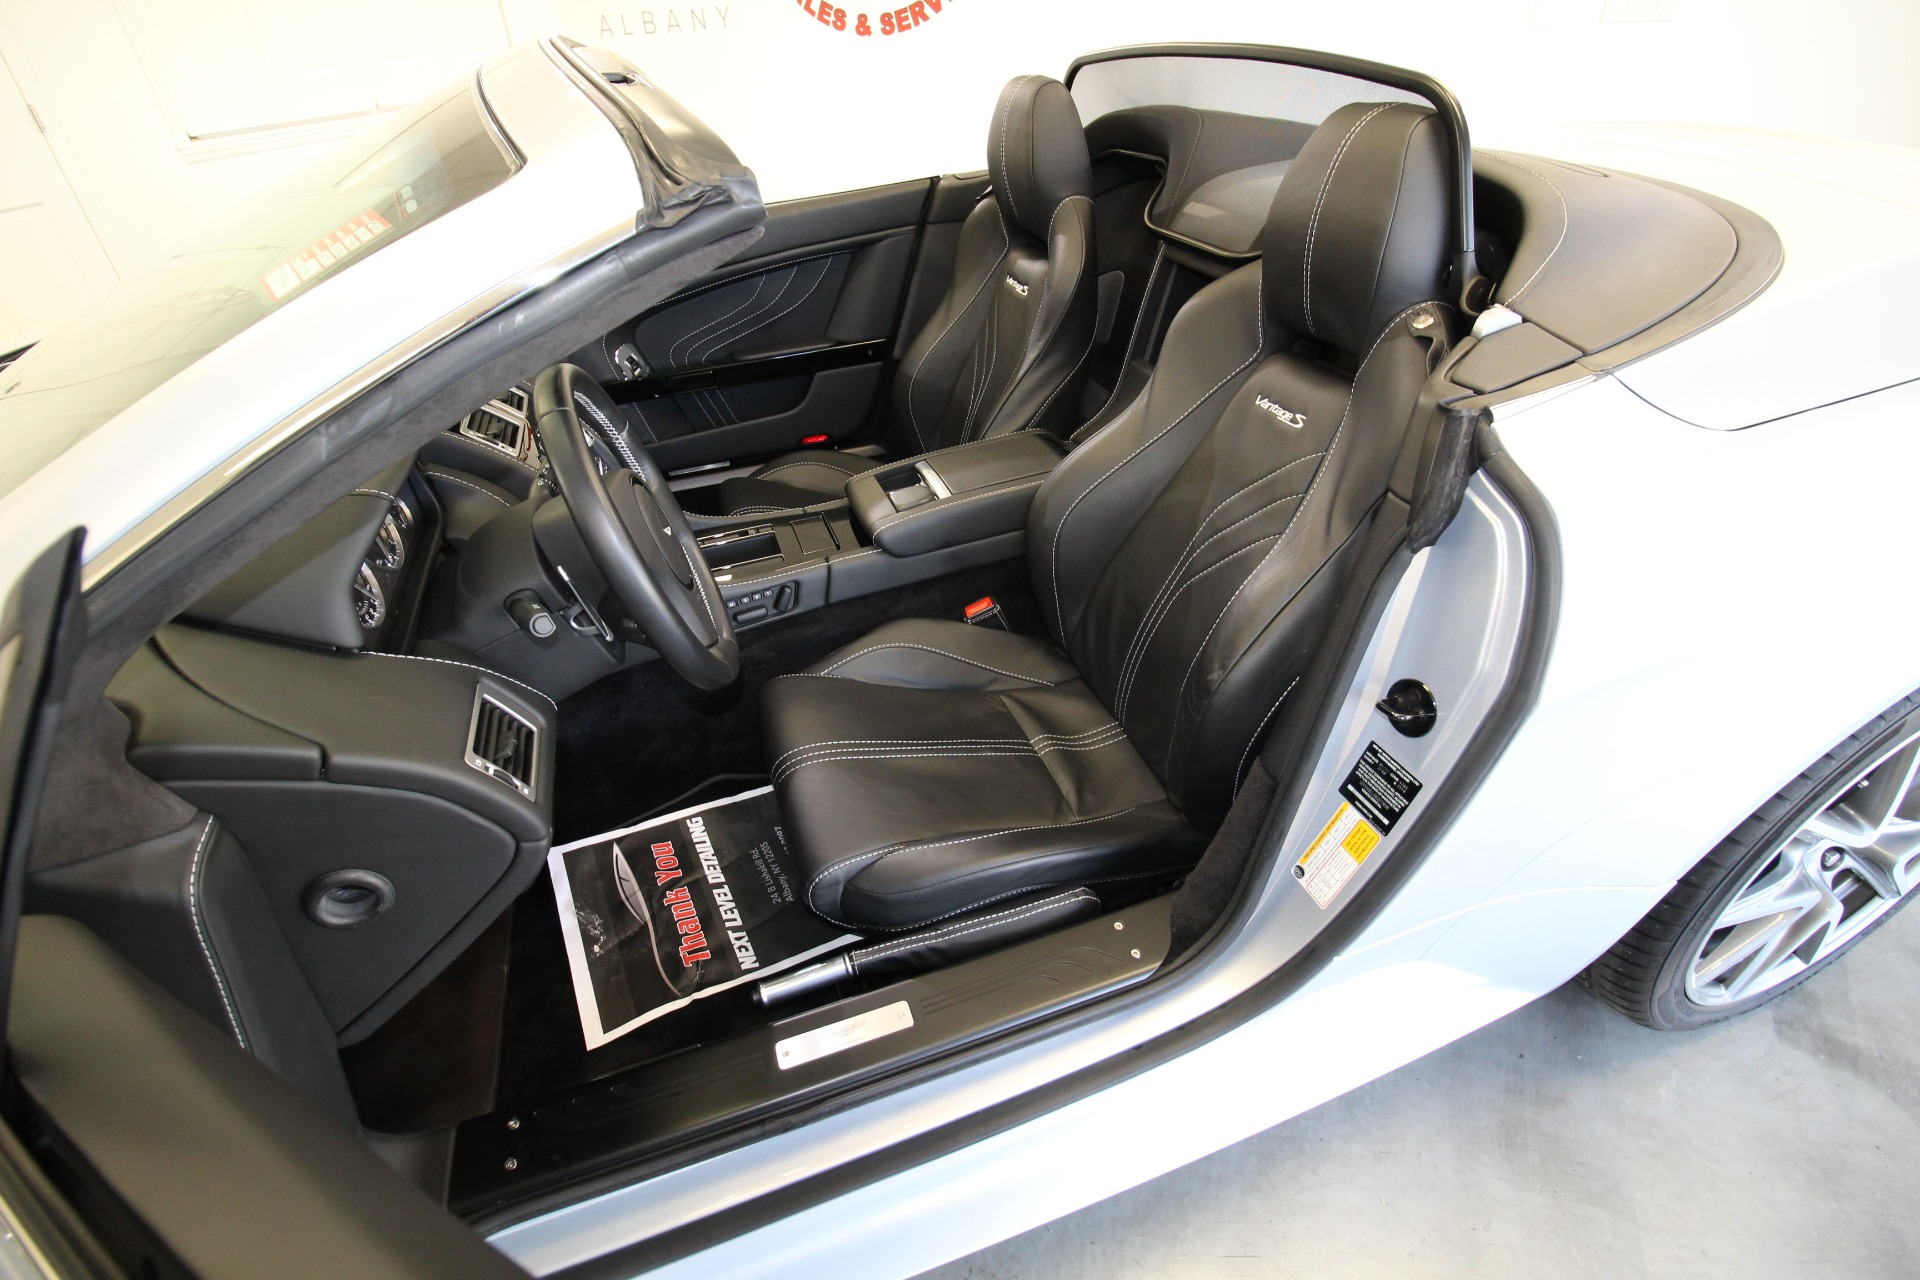 Used 2011 Aston Martin V8 Vantage S S Roadster LIKE NEW LOW MILES JUST TRADED WITH US | Albany, NY